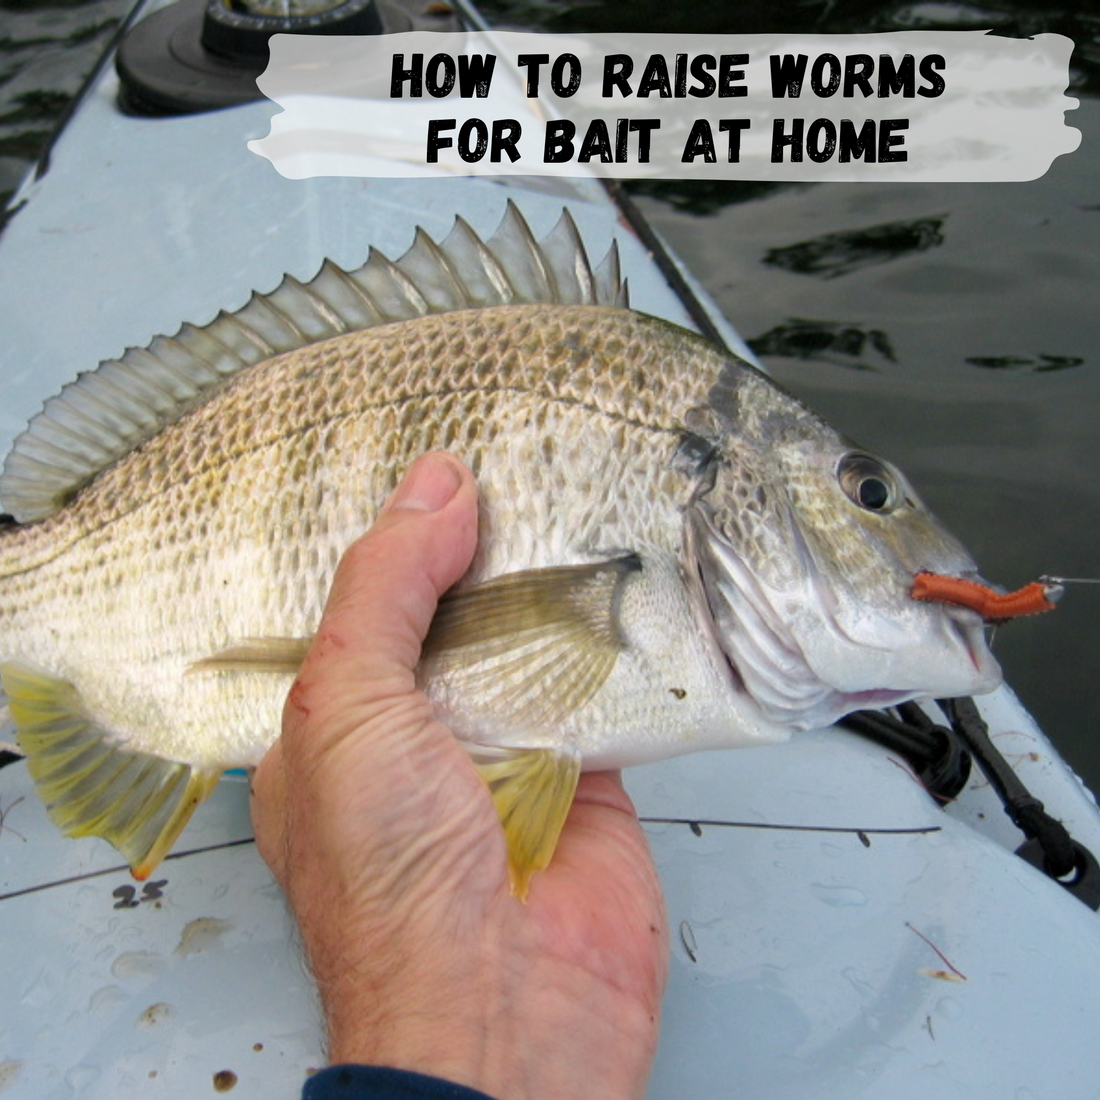 Buy Bait Box Worms Online In India -  India